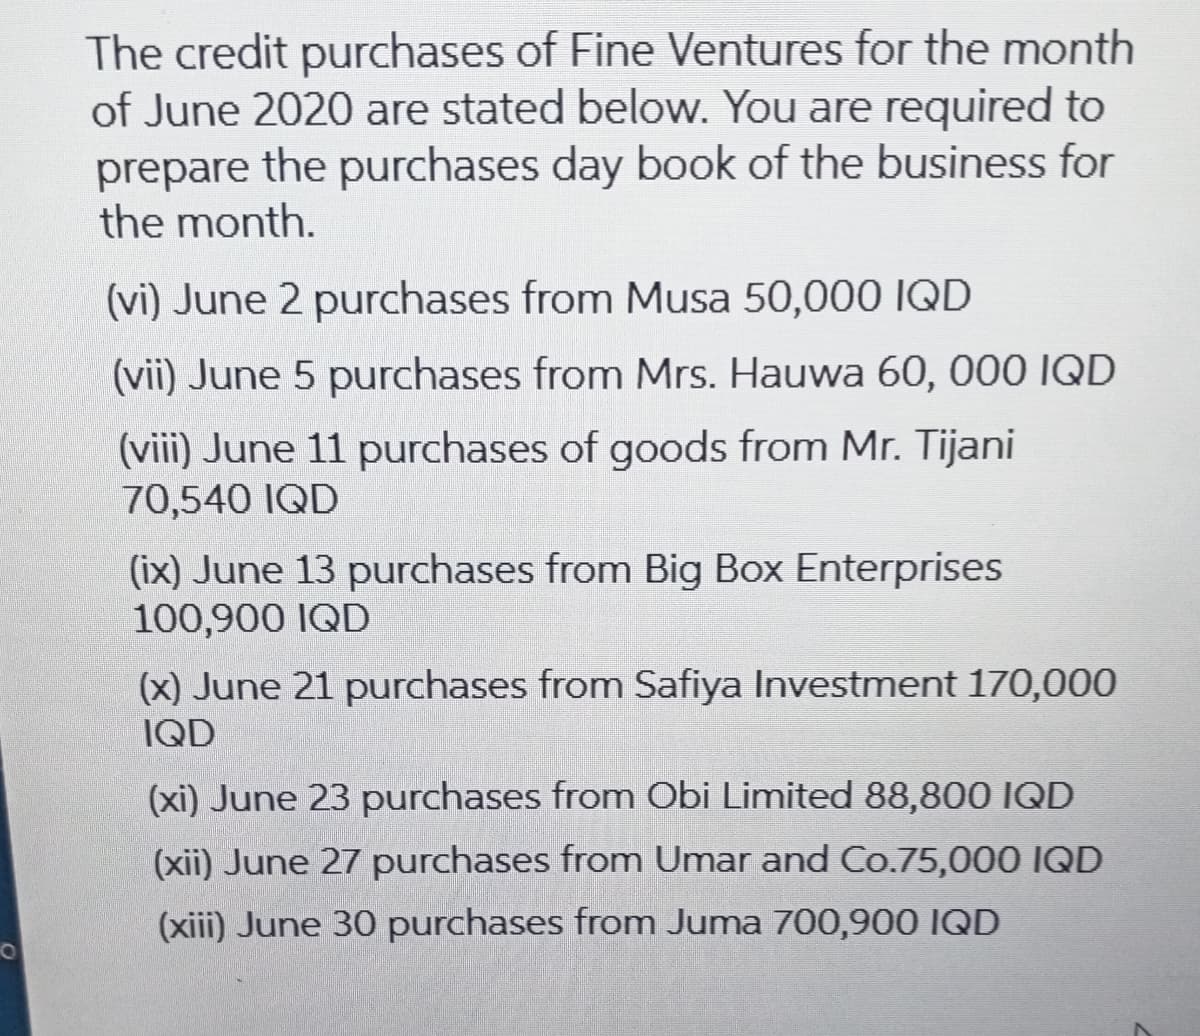 The credit purchases of Fine Ventures for the month
of June 2020 are stated below. You are required to
prepare the purchases day book of the business for
the month.
(vi) June 2 purchases from Musa 50,000 IQD
(vii) June 5 purchases from Mrs. Hauwa 60, 000 IQD
(viii) June 11 purchases of goods from Mr. Tijani
70,540 IQD
(ix) June 13 purchases from Big Box Enterprises
100,900 IQD
(x) June 21 purchases from Safiya Investment 170,000
IQD
(xi) June 23 purchases from Obi Limited 88,800 IQD
(xii) June 27 purchases from Umar and Co.75,000 IQD
(xiii) June 30 purchases from Juma 700,900 IQD
